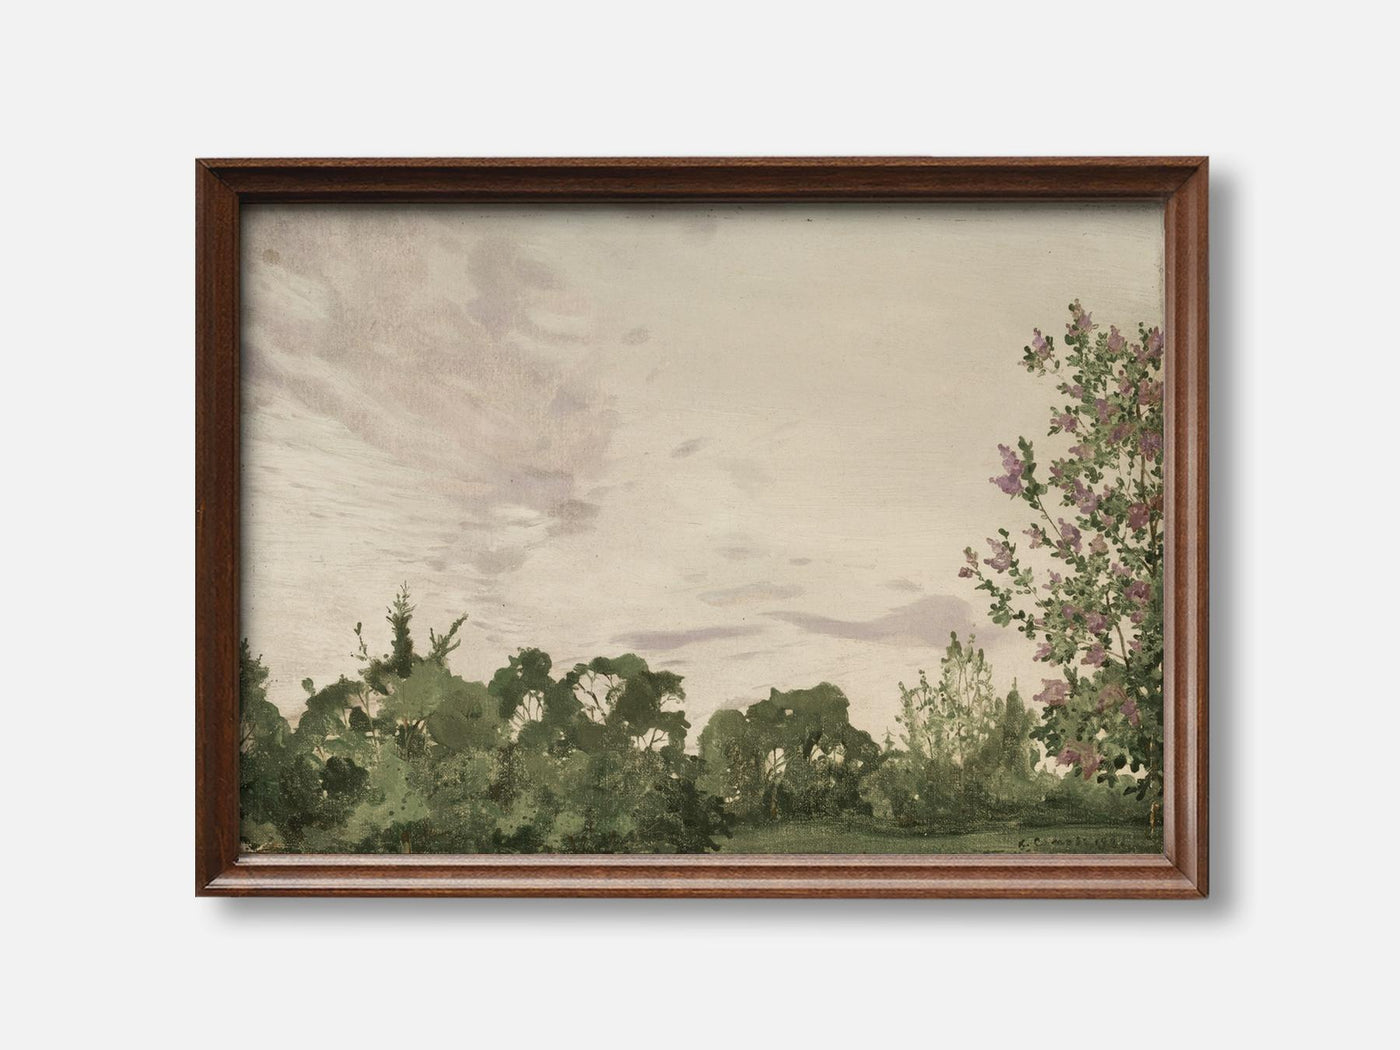 Evening Landscape with Lilacs mockup - A_spr43-V1-PC_F+WA-SS_1-PS_5x7-C_def variant